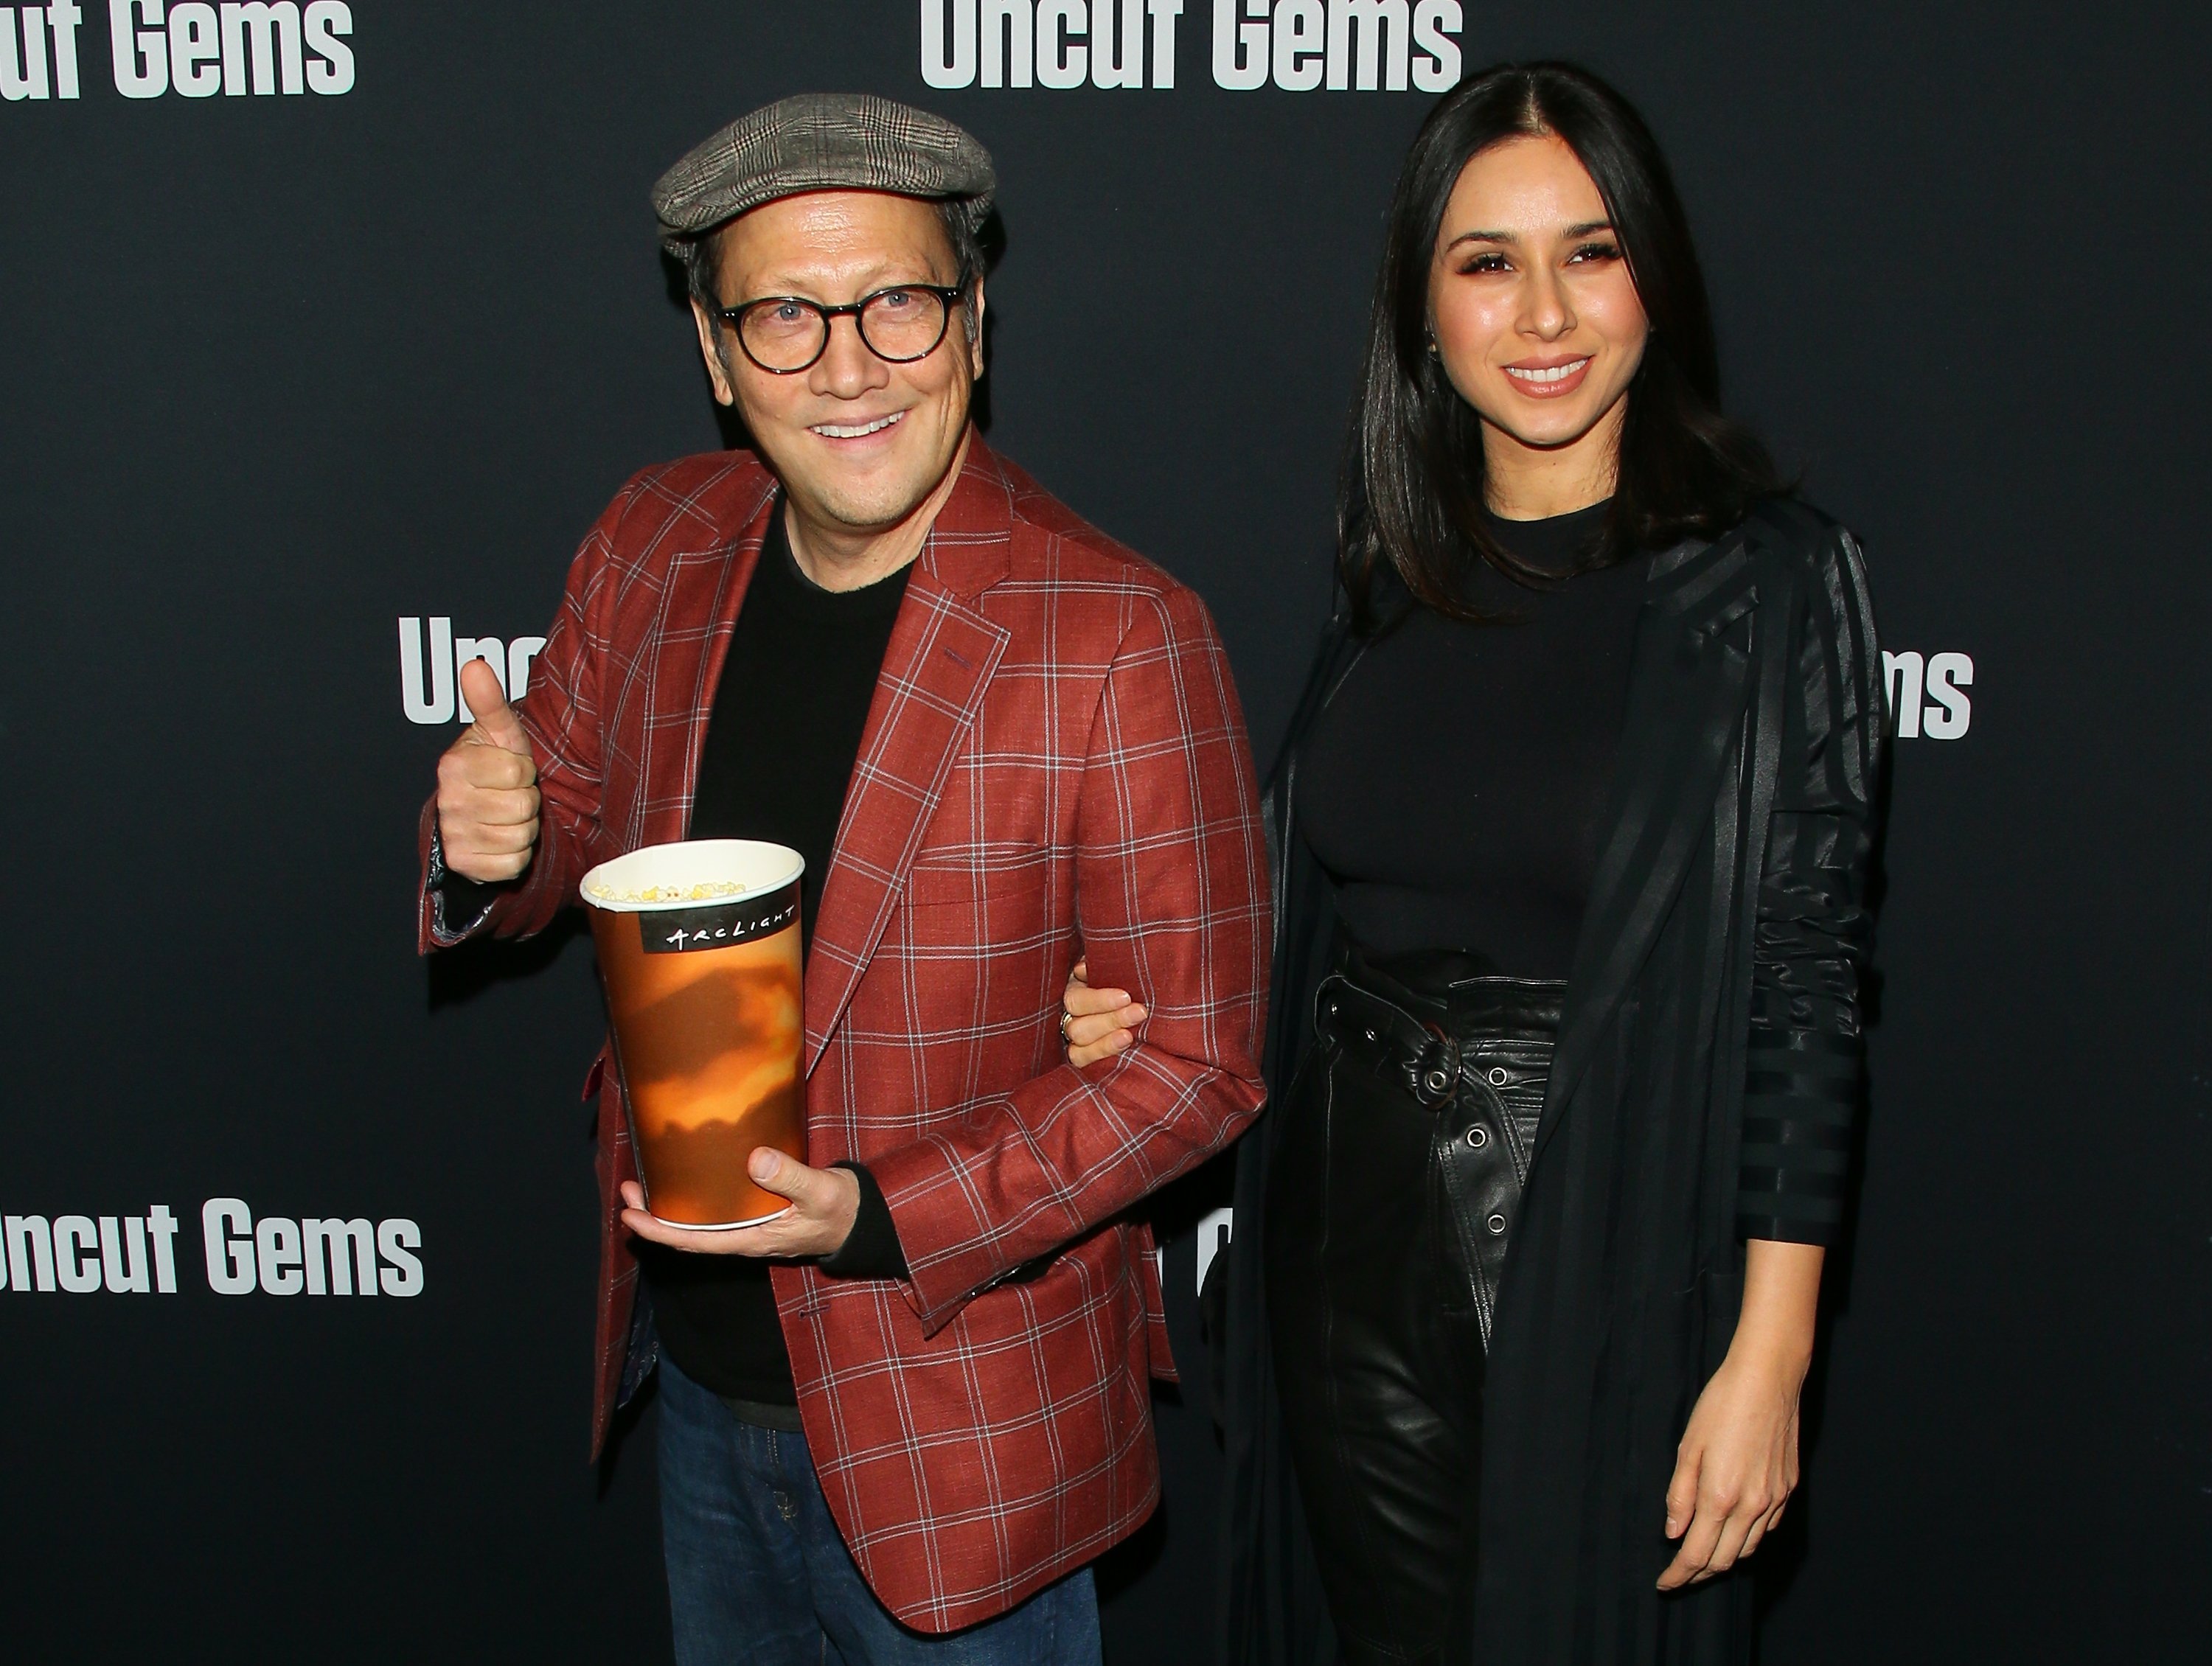 Rob Schneider and Patricia Azarcoya Schneider attending the premiere of  "Uncut Gems" at The Dome at Arclight Hollywood  in Hollywood, California, in December 2019. I Image: Getty Images.